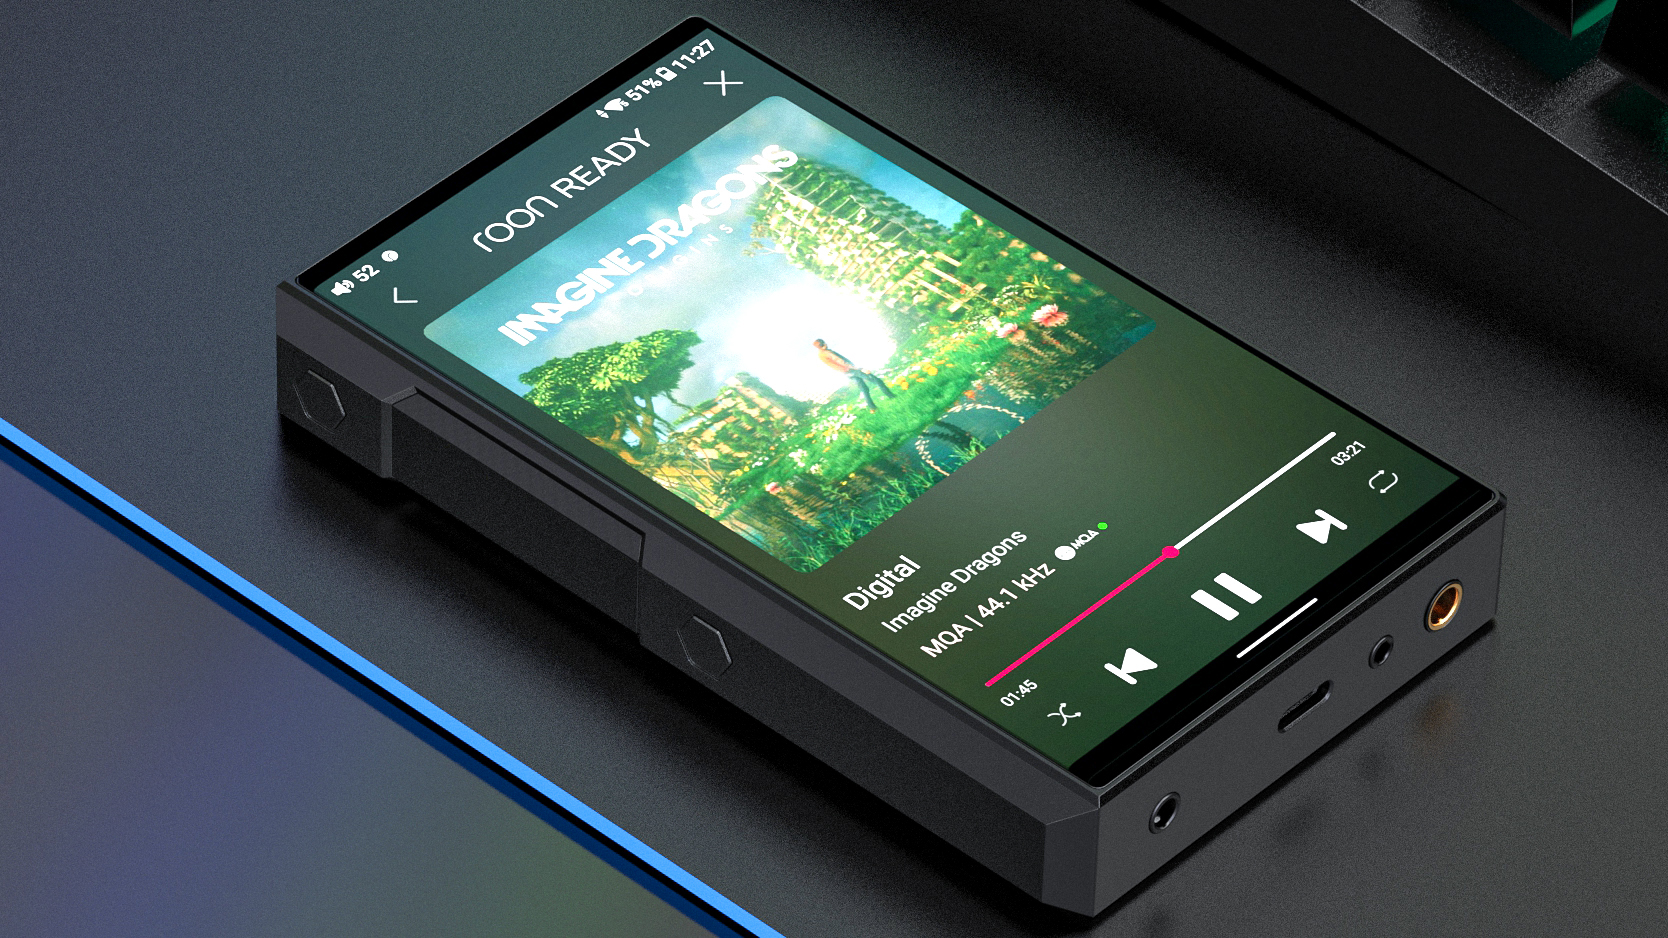 Image of a FiiO M11S Hi-Res Portable Music Player on a black desk